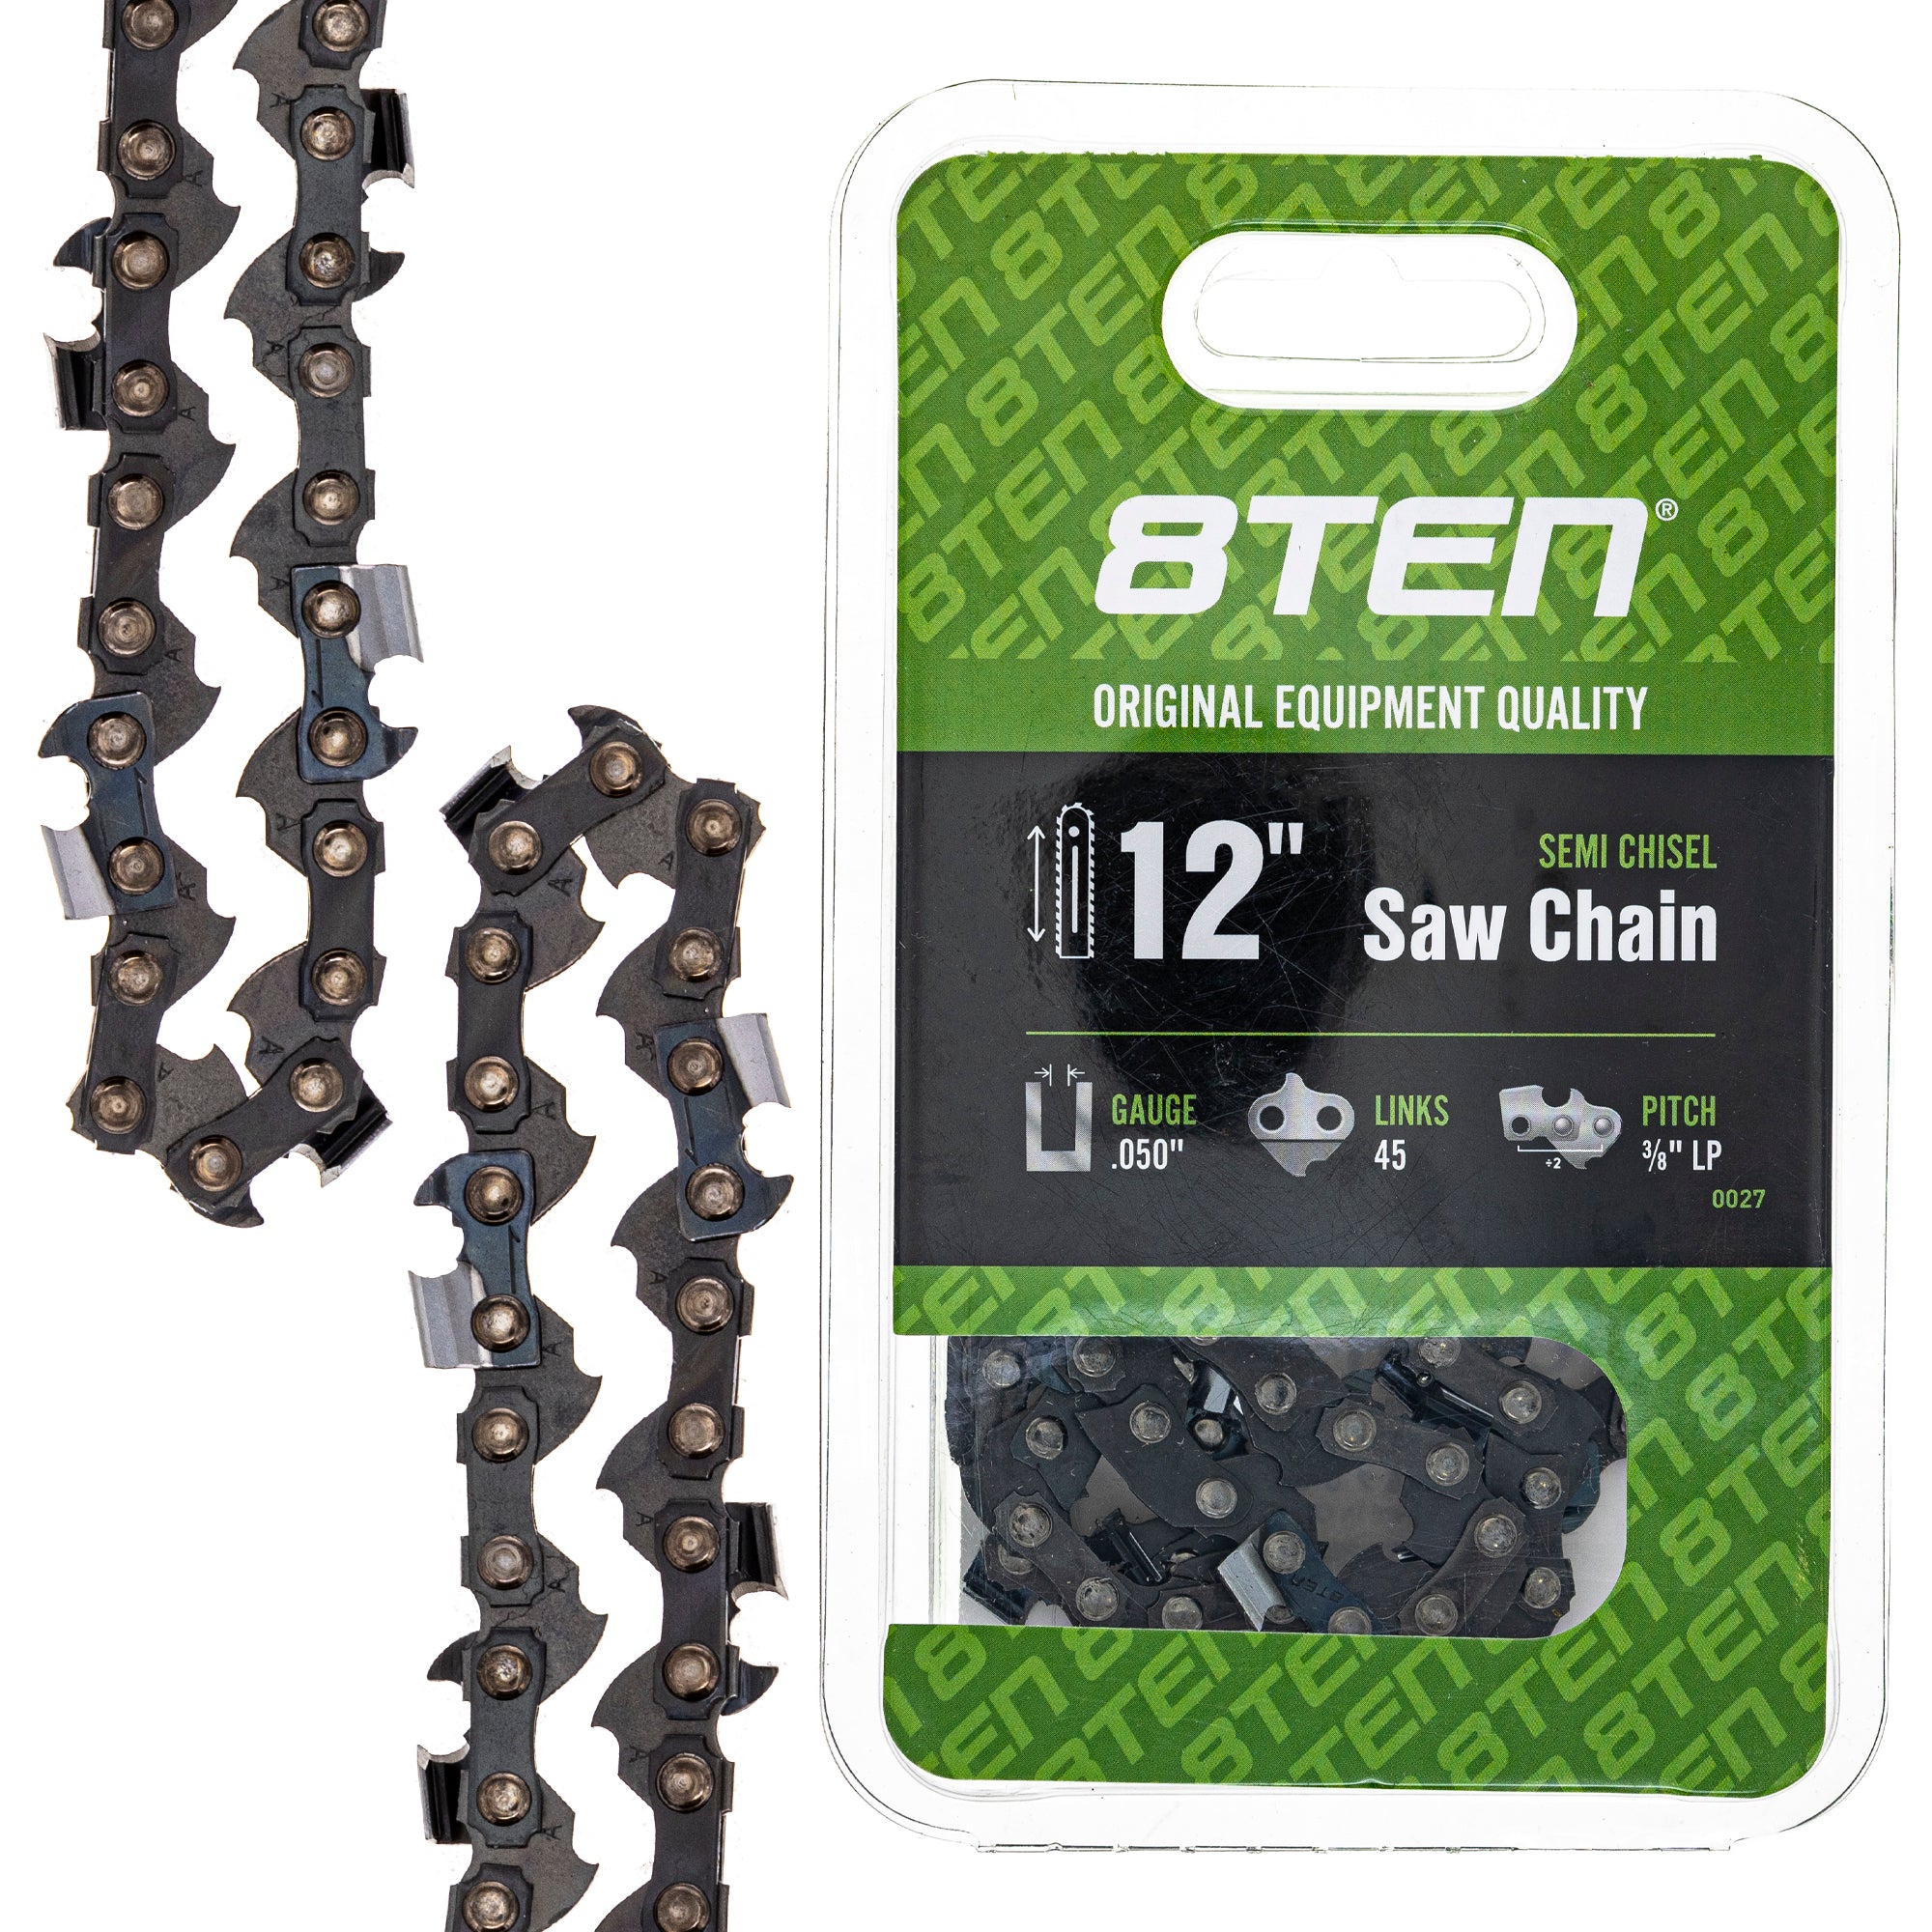 Chainsaw Chain 12 Inch .050 3/8 45DL for zOTHER Windsor Stens Oregon Carlton Woodshark 8TEN 810-CCC2249H